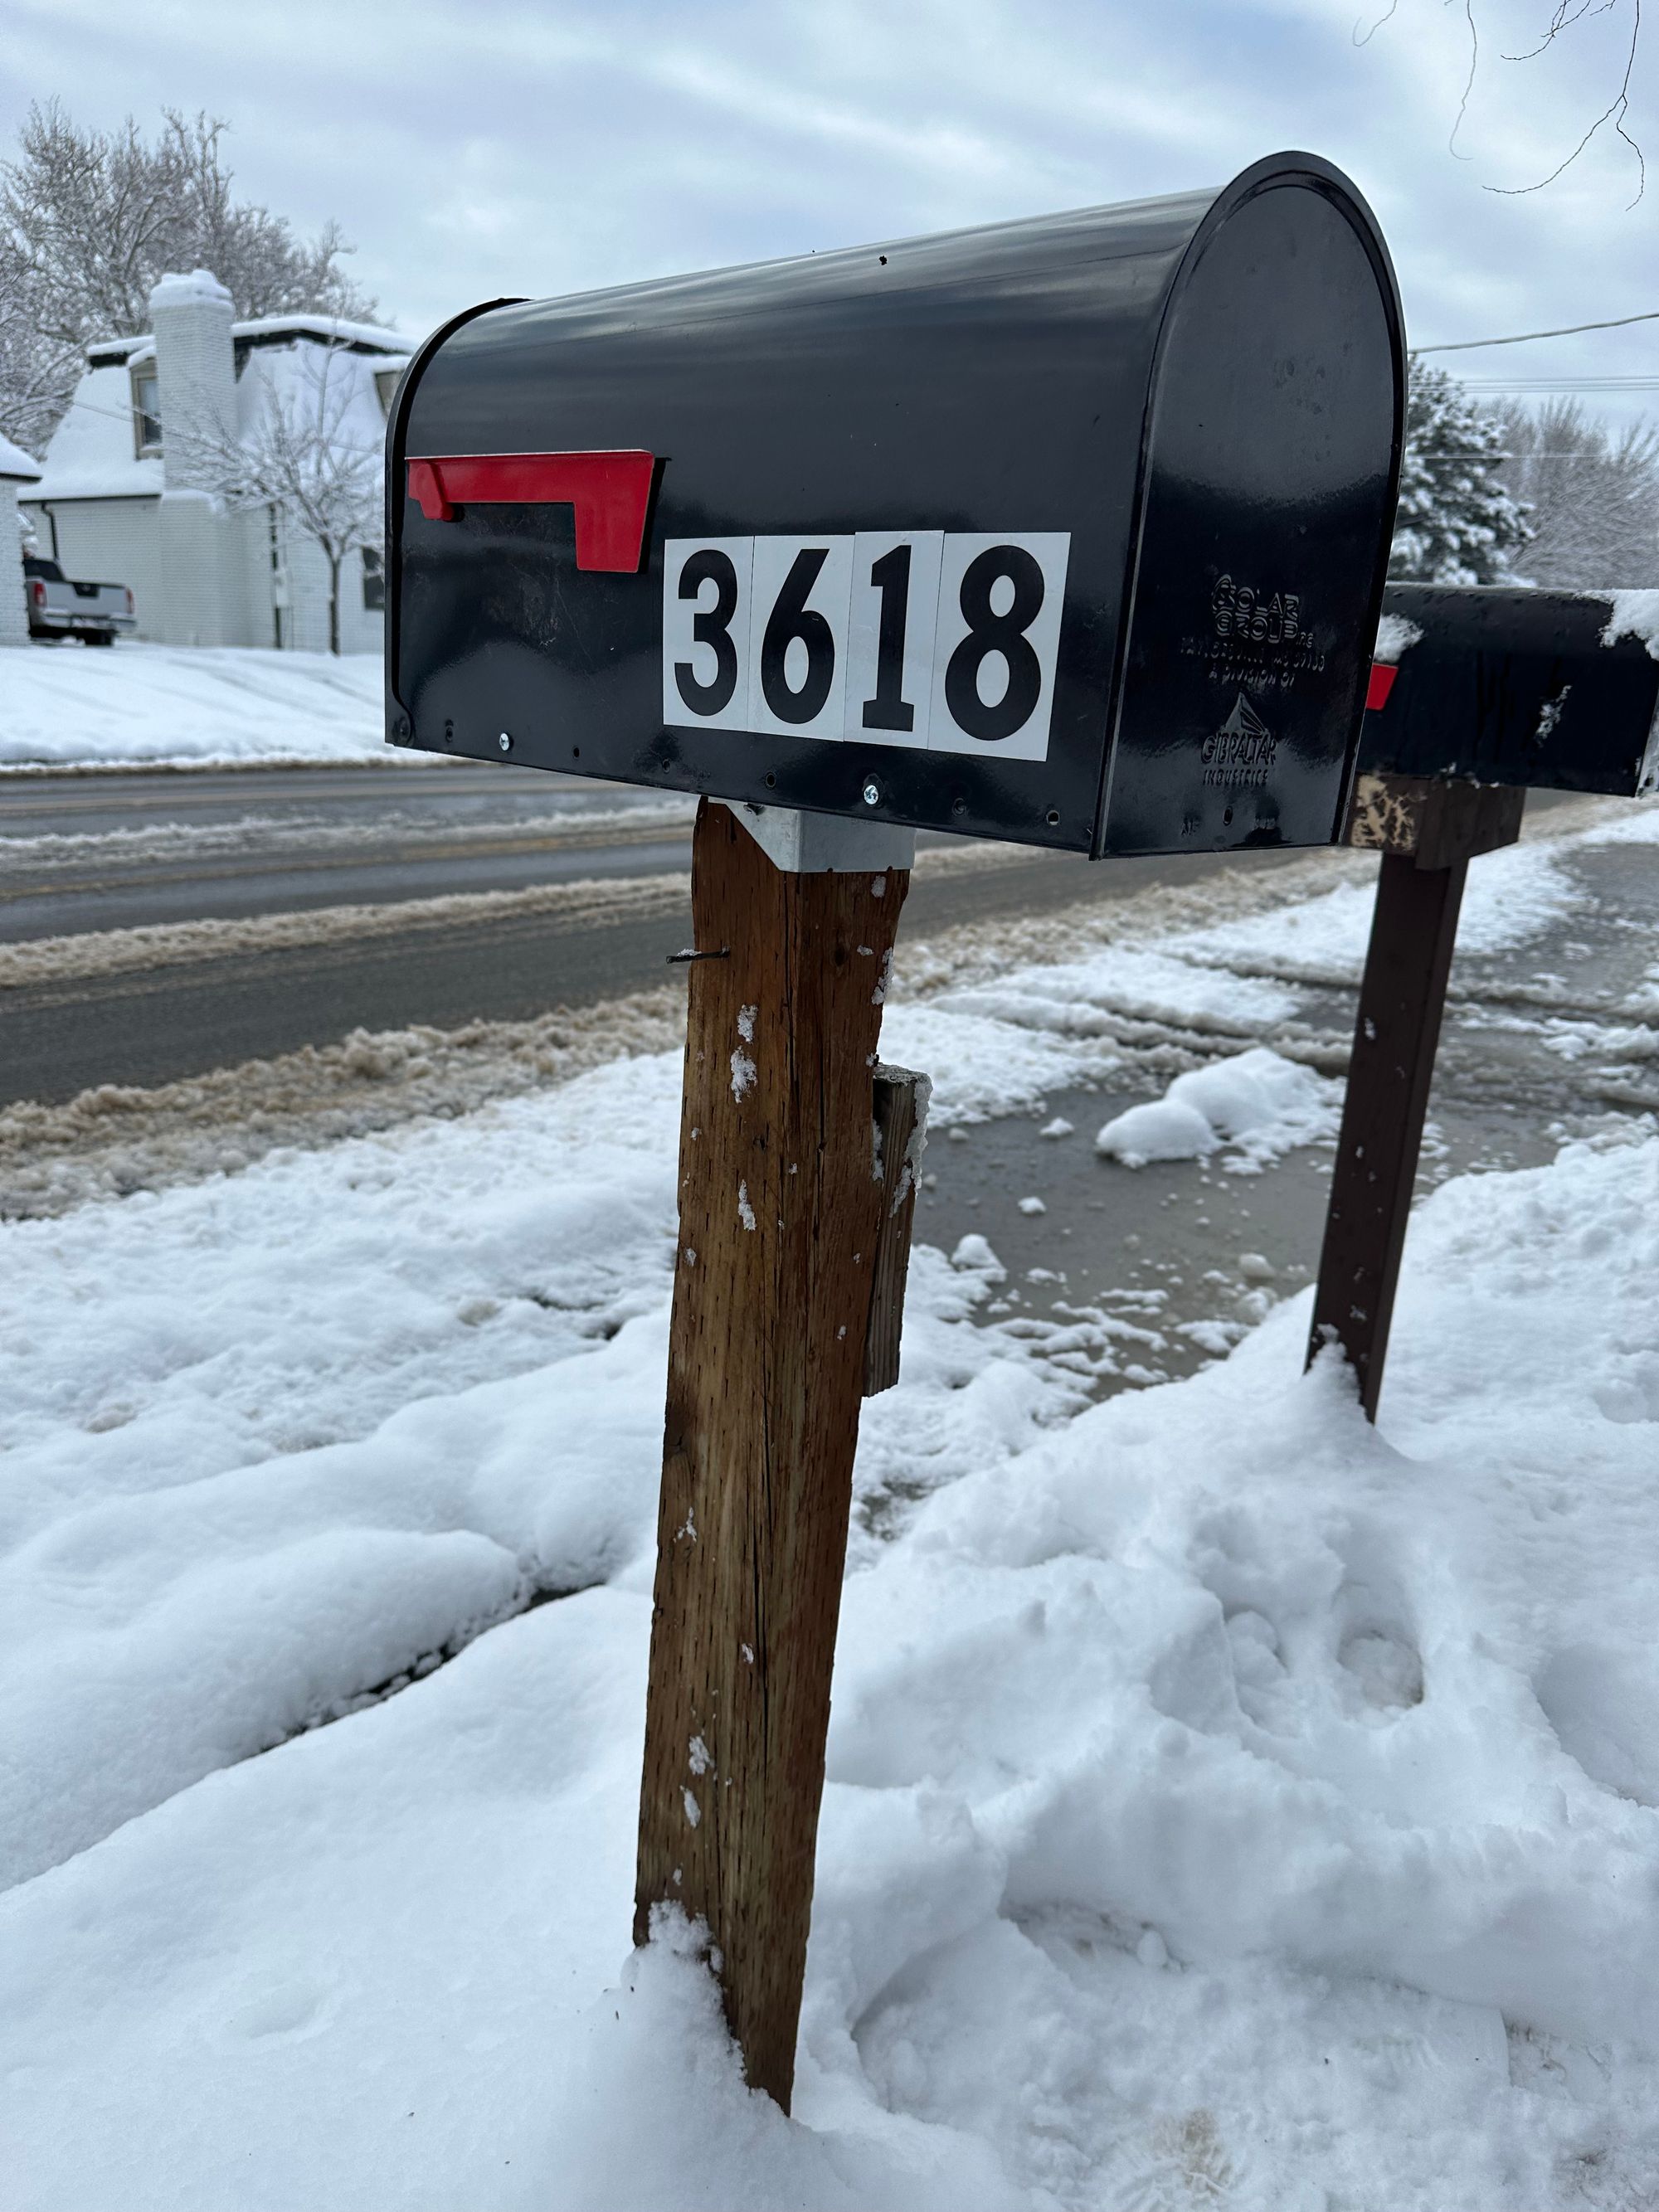 Mailbox reinstalled and secured with the mounting board + bracket combination.